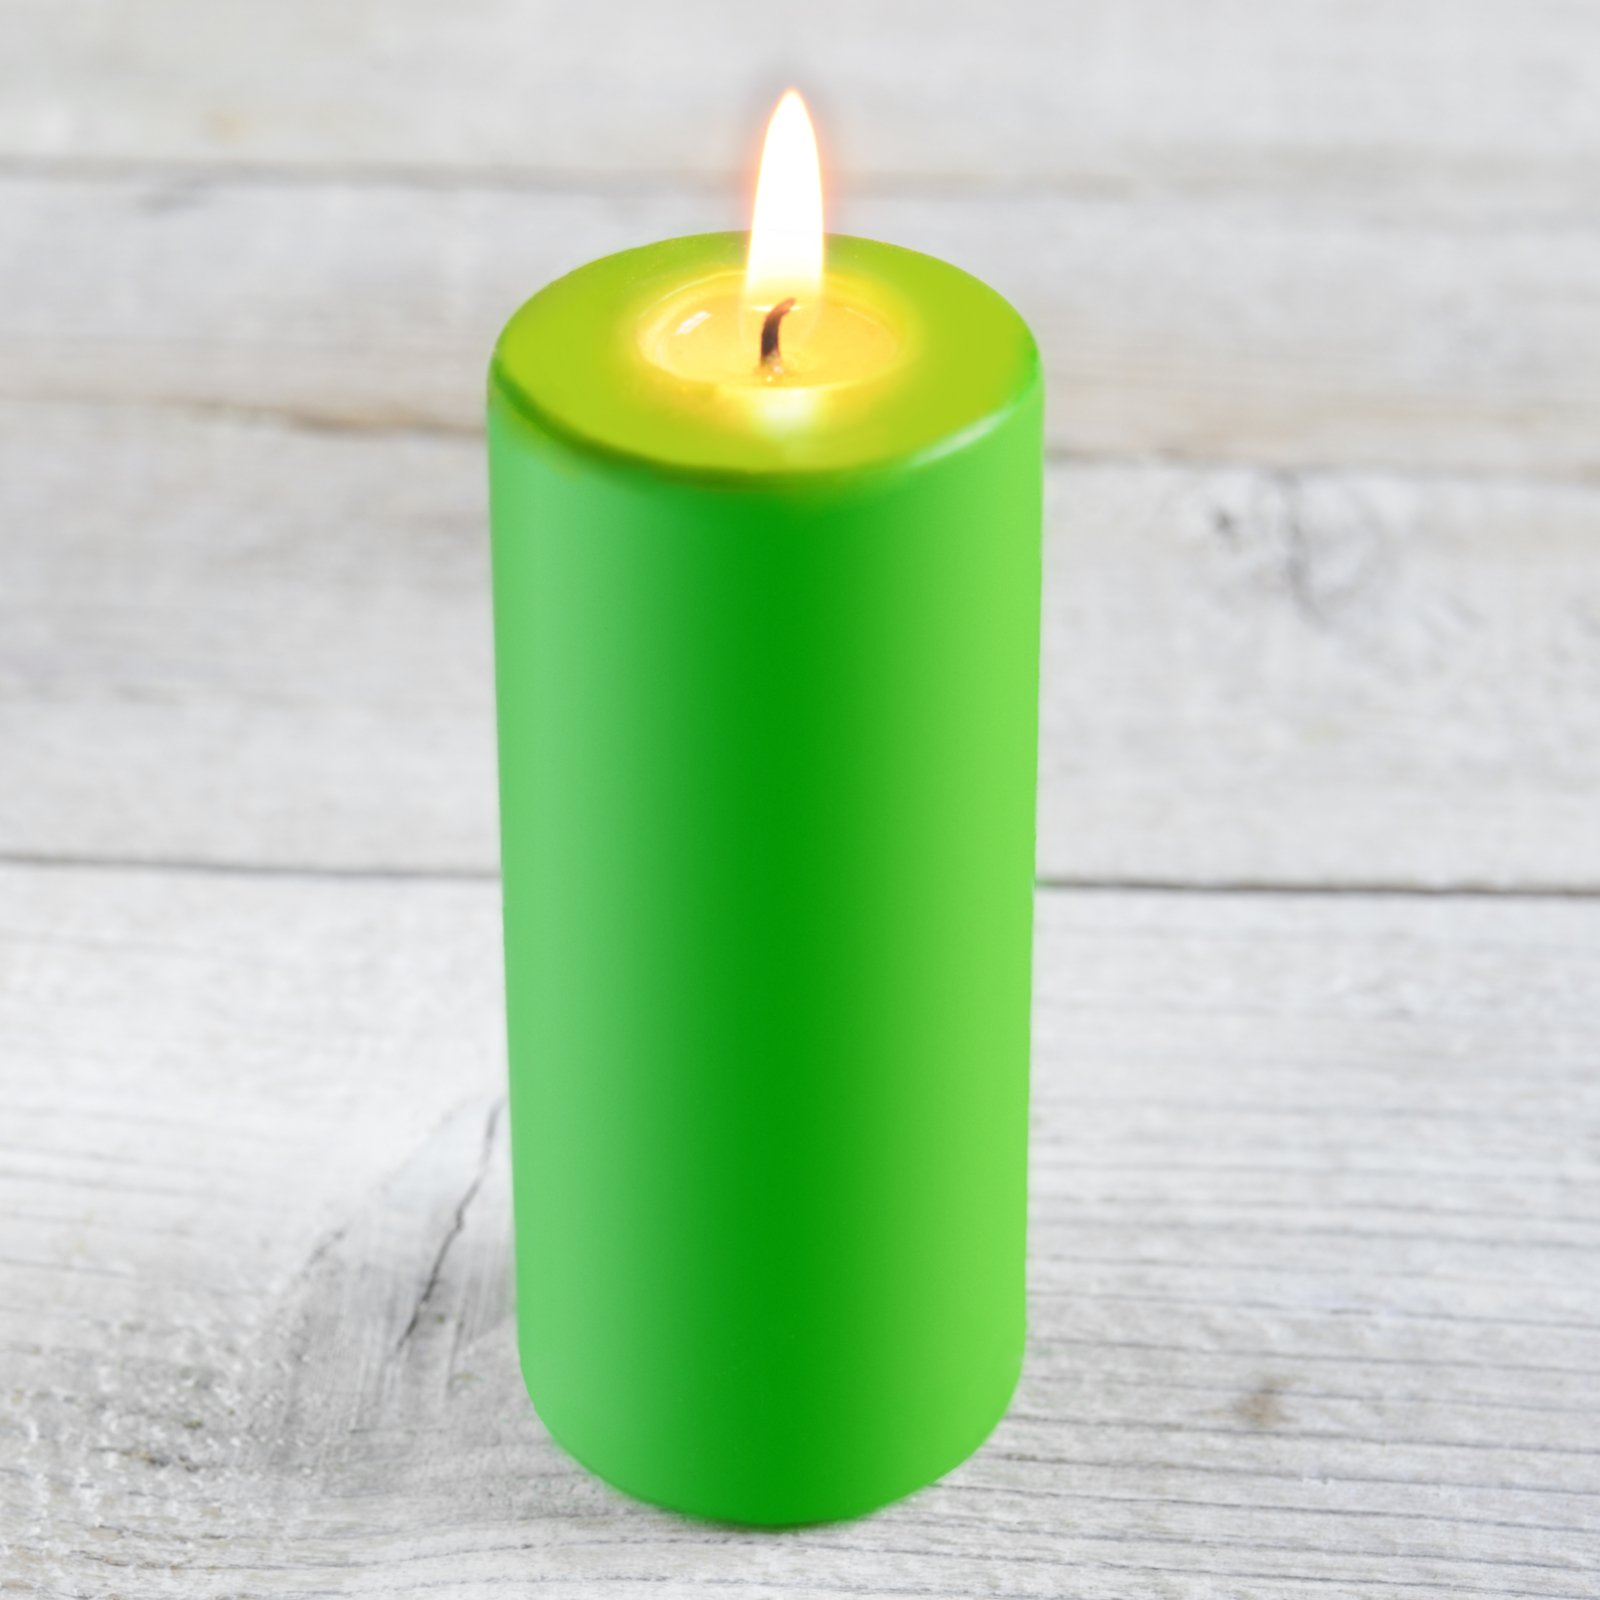 Bitcoin in Brief Friday: That Green Candle